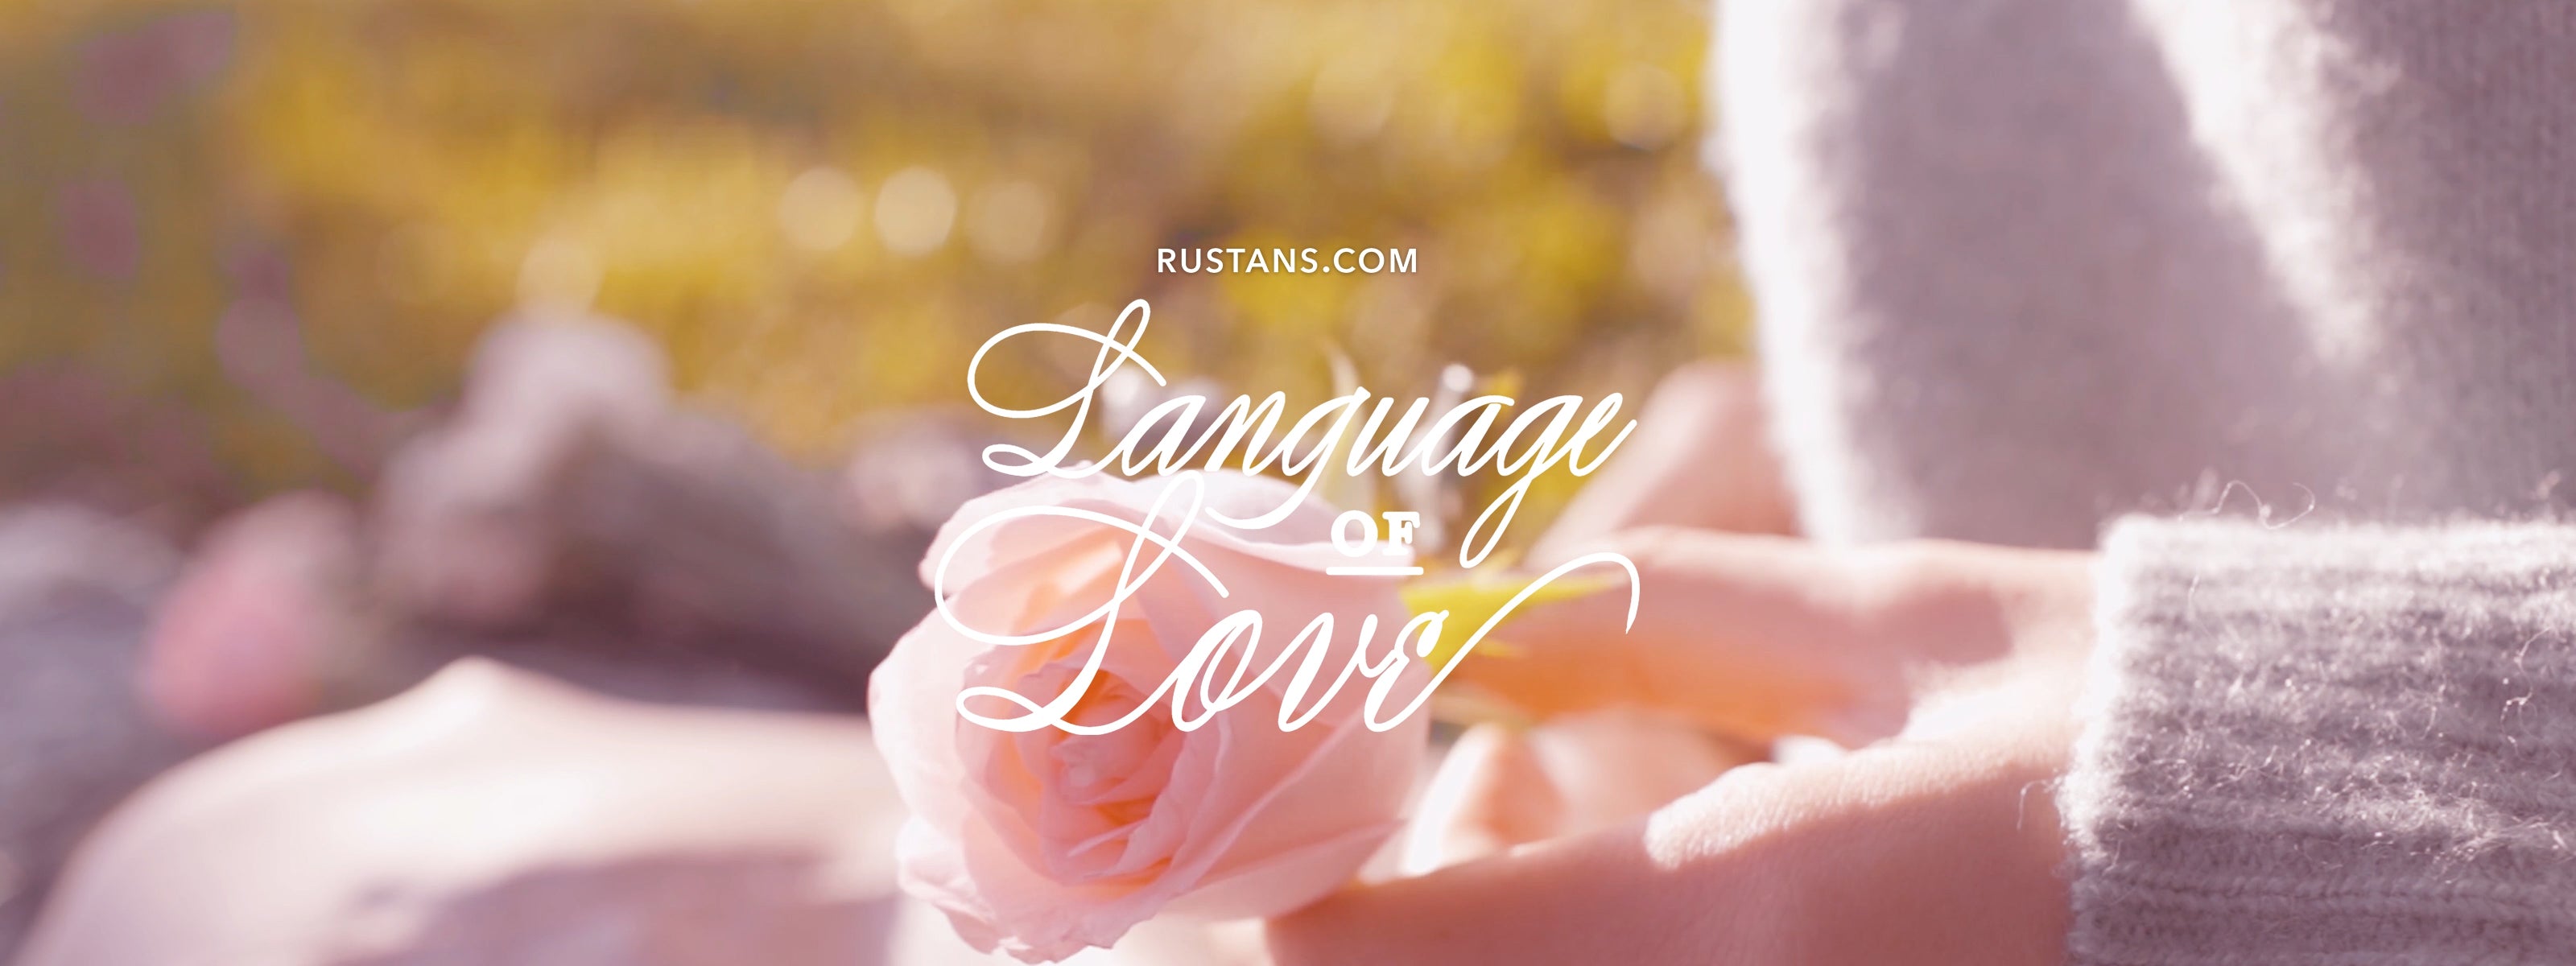 Language of Love Gift Guide—Rustans.com